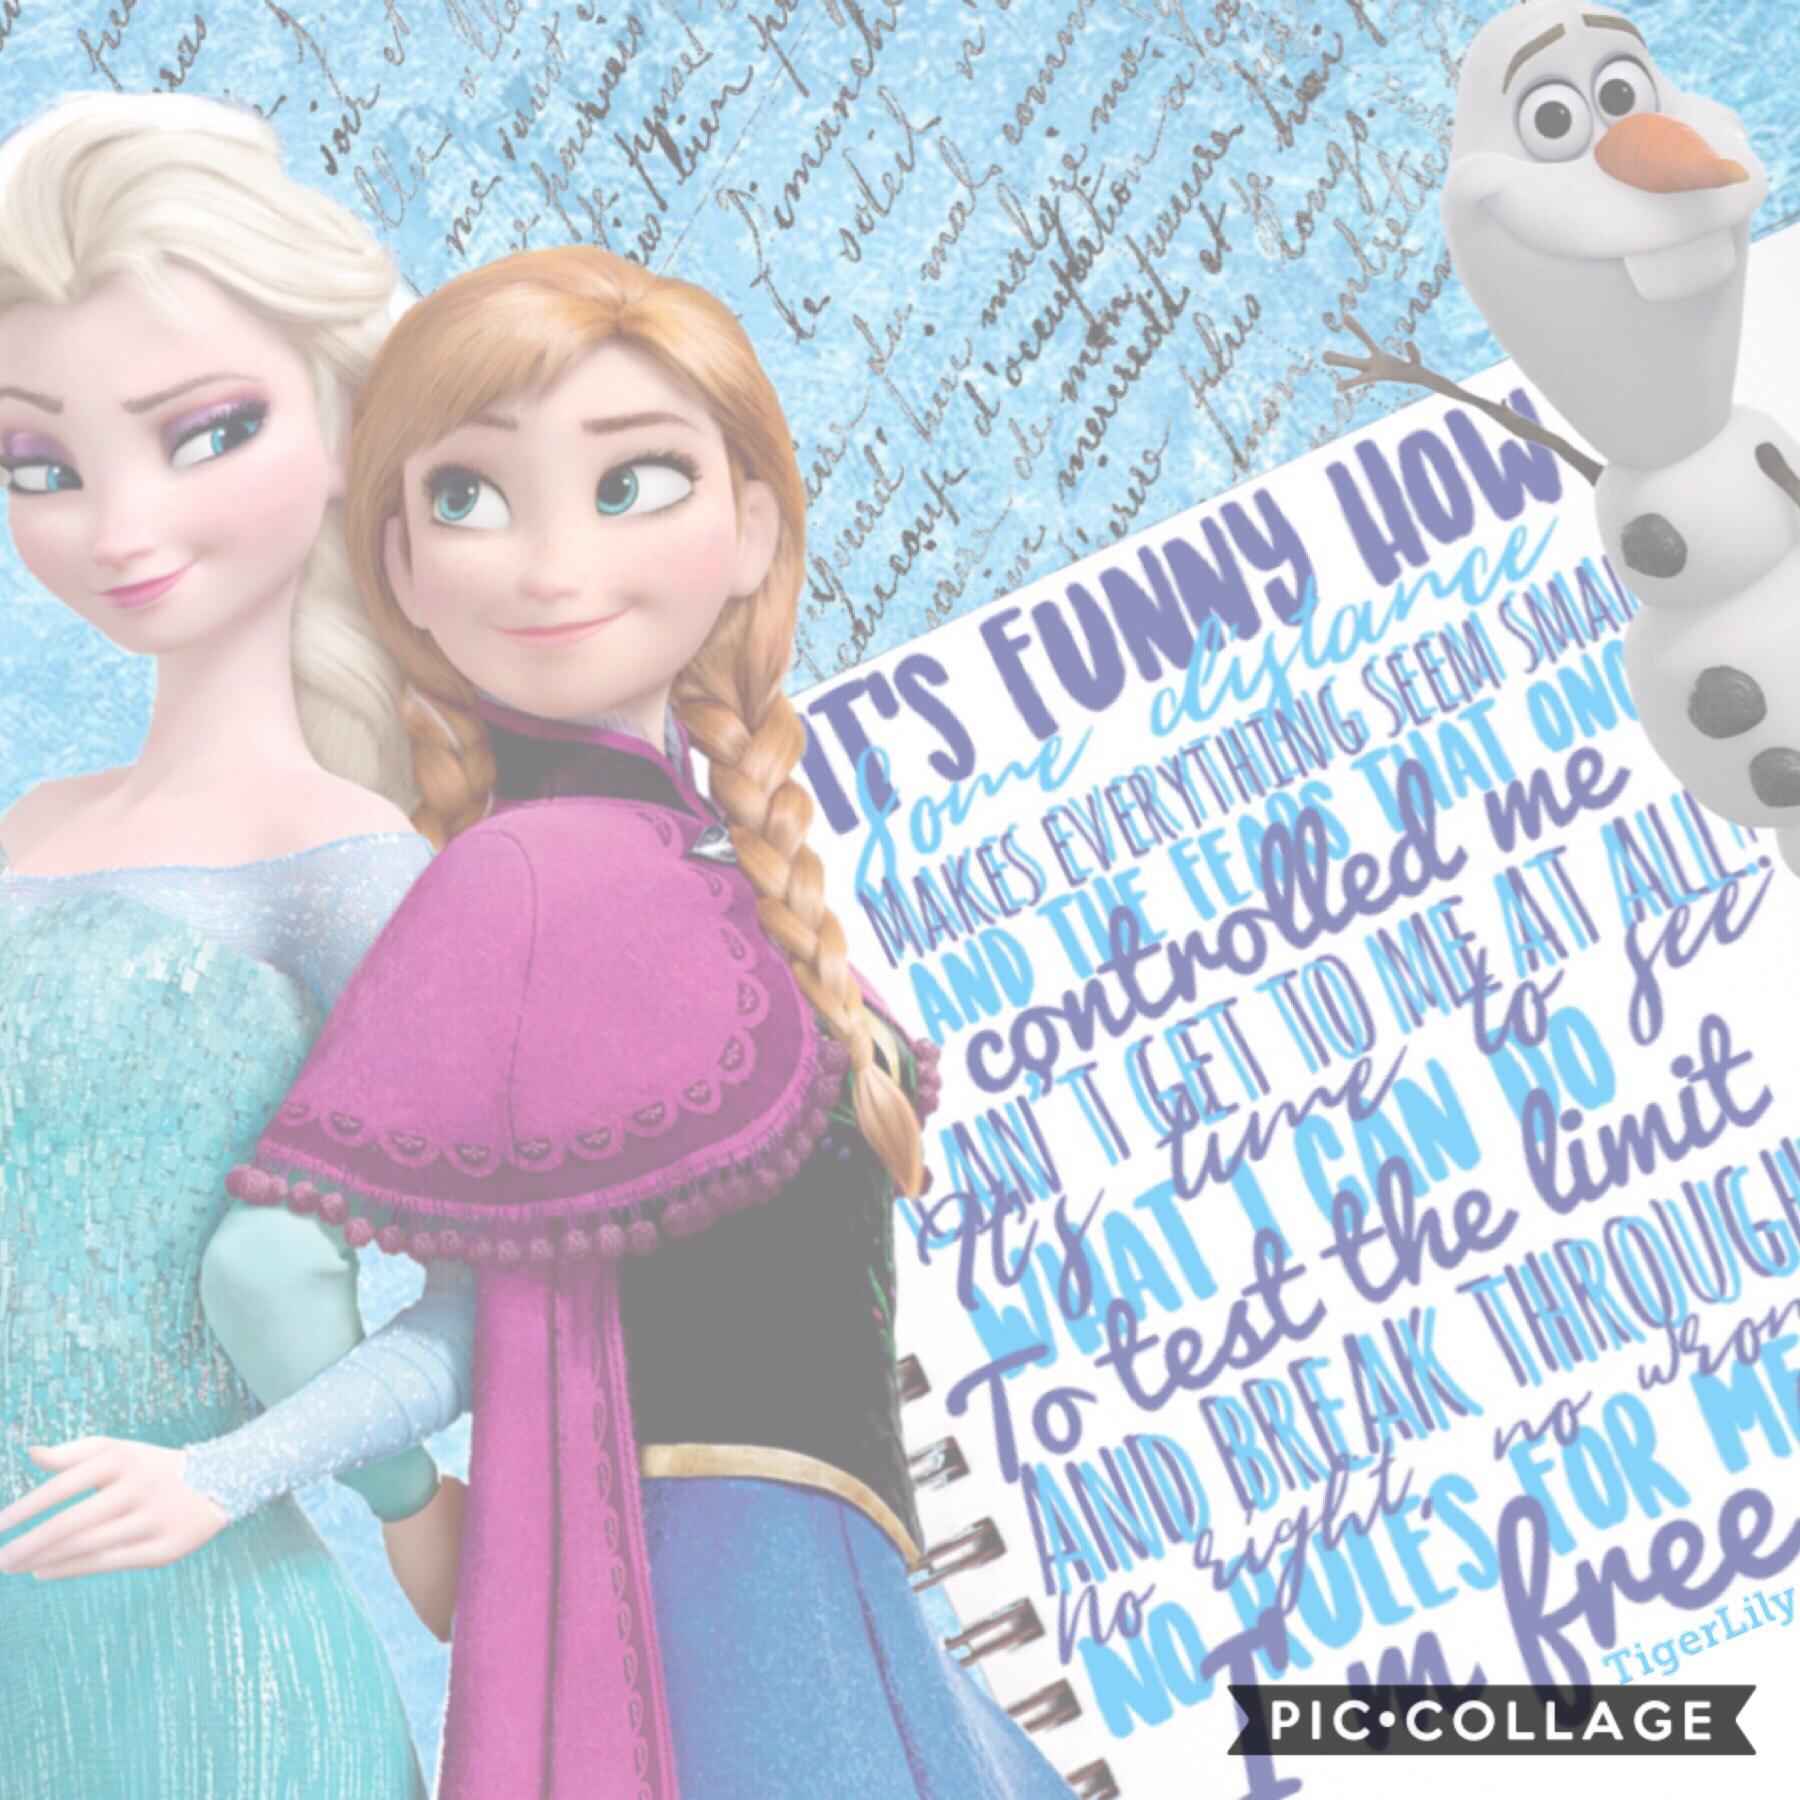 Yo PEEPS!! Who else loves this song? And the movie! I love them and also Moana!  I have a question btw. When I change something on my bio and I try to save it, it says Enter A URL. What does that mean?😂Anyway.. what’s your favorite song in Frozen? (Let it